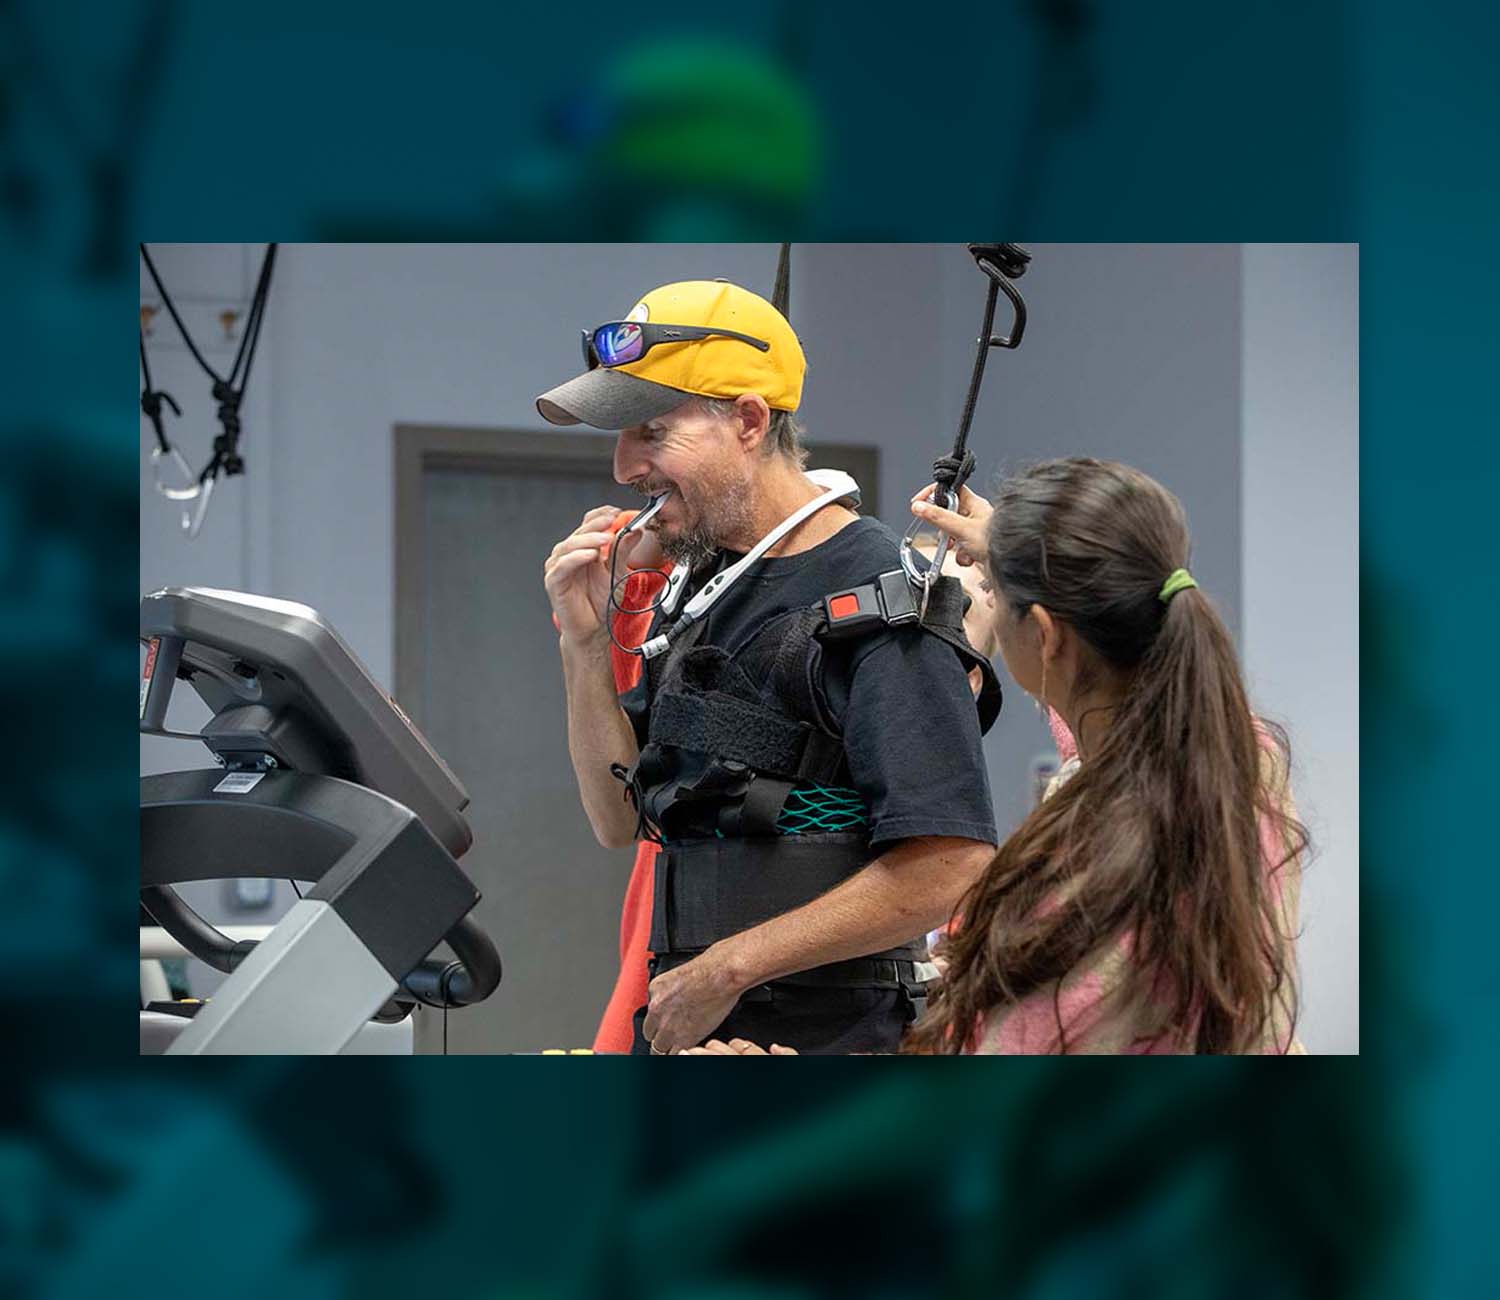 Man wearing a baseball cap puts a device in his mouth. A harness is helping to support him, as is a woman standing beside him. She has a long dark ponytail.